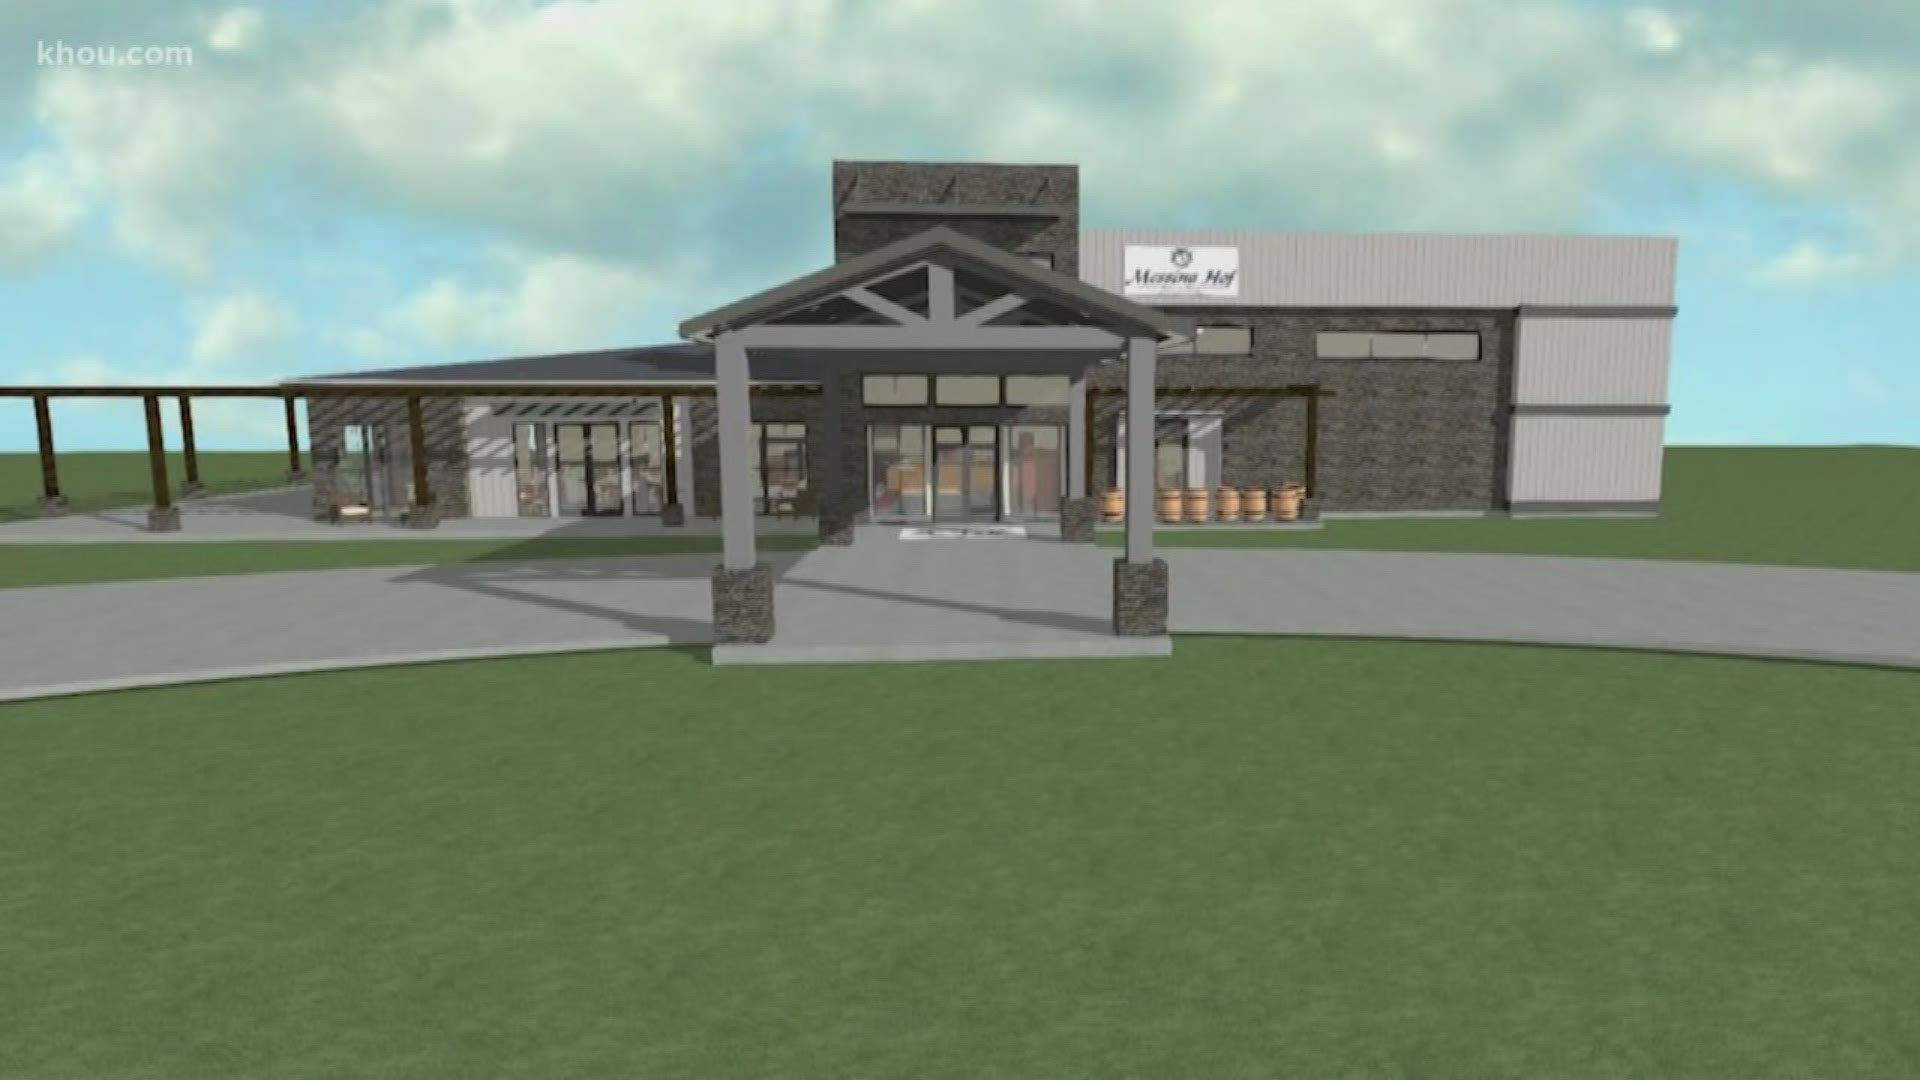 Messina Hof Wine Cellars, Inc. announced plans to open its fourth location in the Harvest Green community next year. It will feature a vineyard with a tasting room and farm to table restaurant.